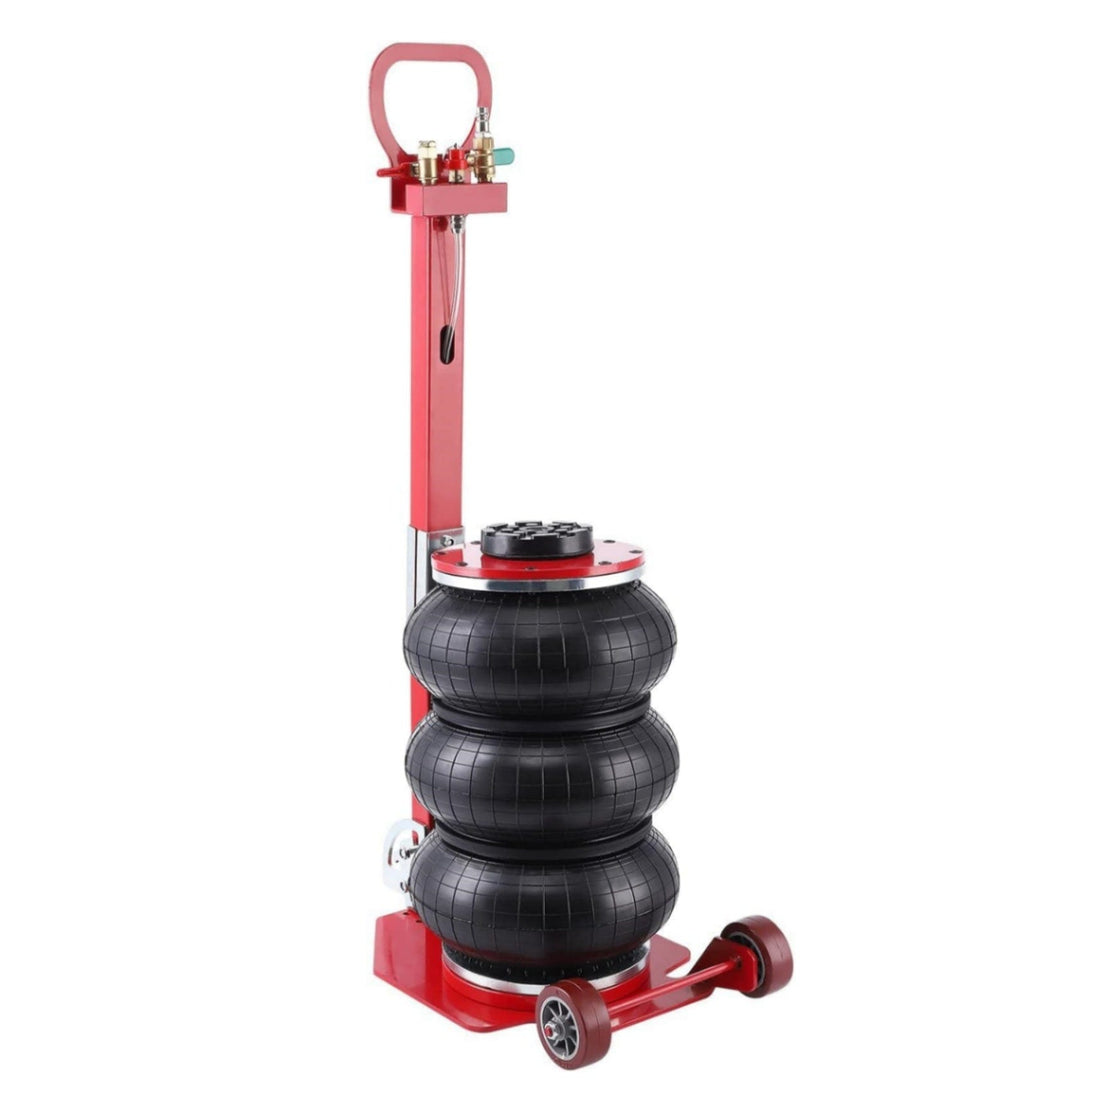 5 Ton Air Jack, 15.7 Inch Height, Fast Lifting with Long Handles